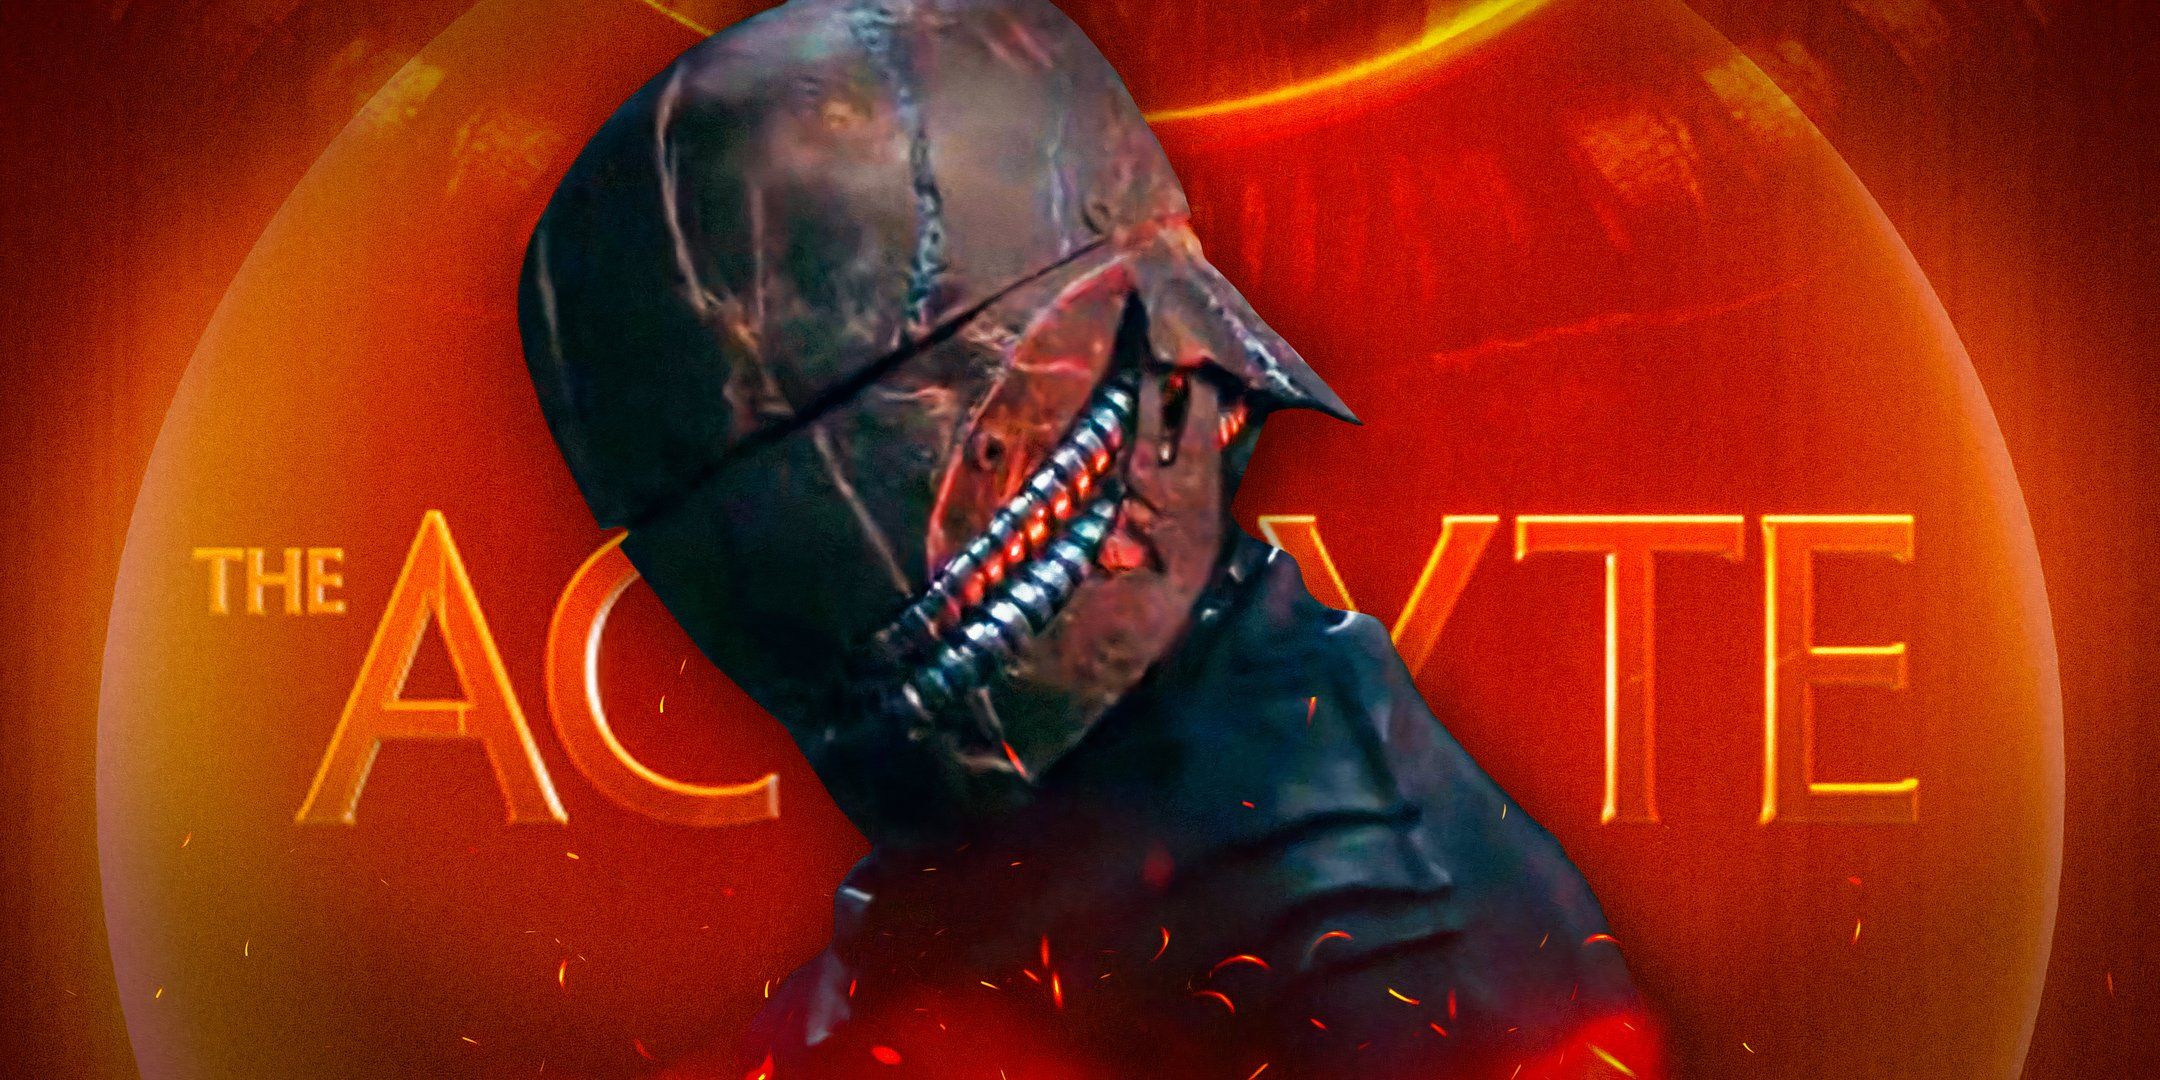 Manny Jacinto's Stranger Sith Lord, edited over The Acolyte's logo